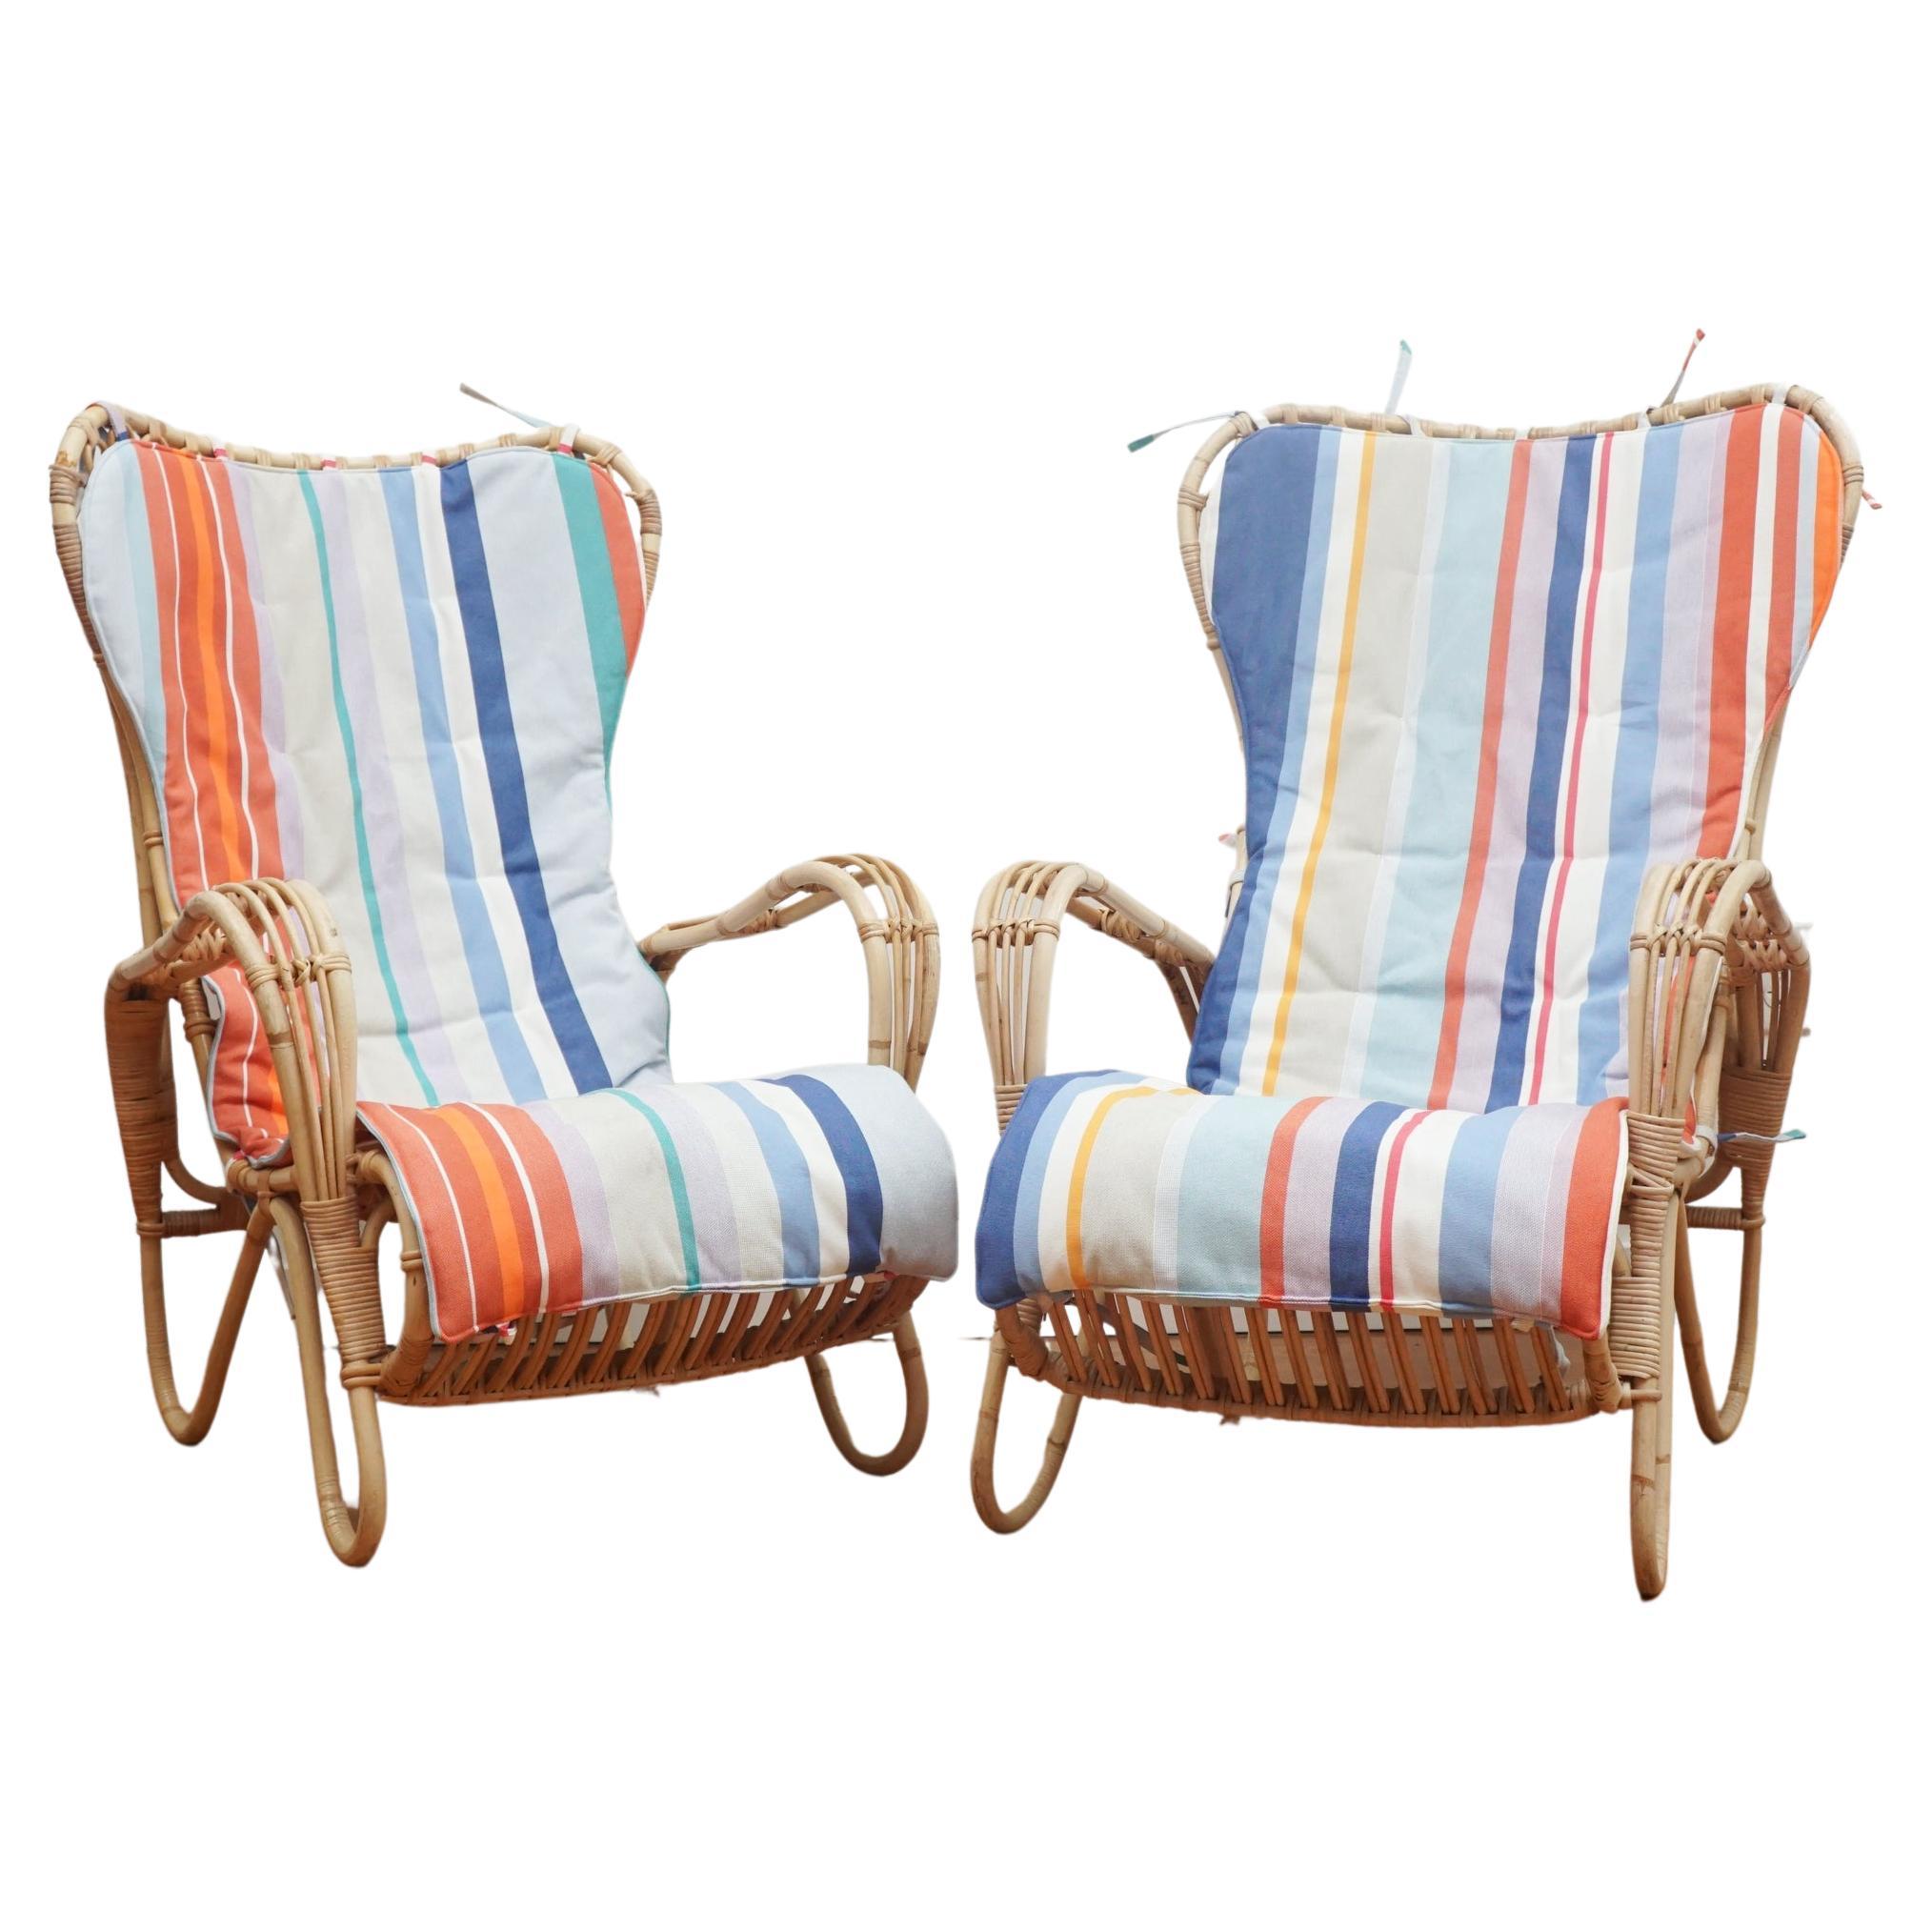 Pair of Vintage Rattan Lounge Chairs